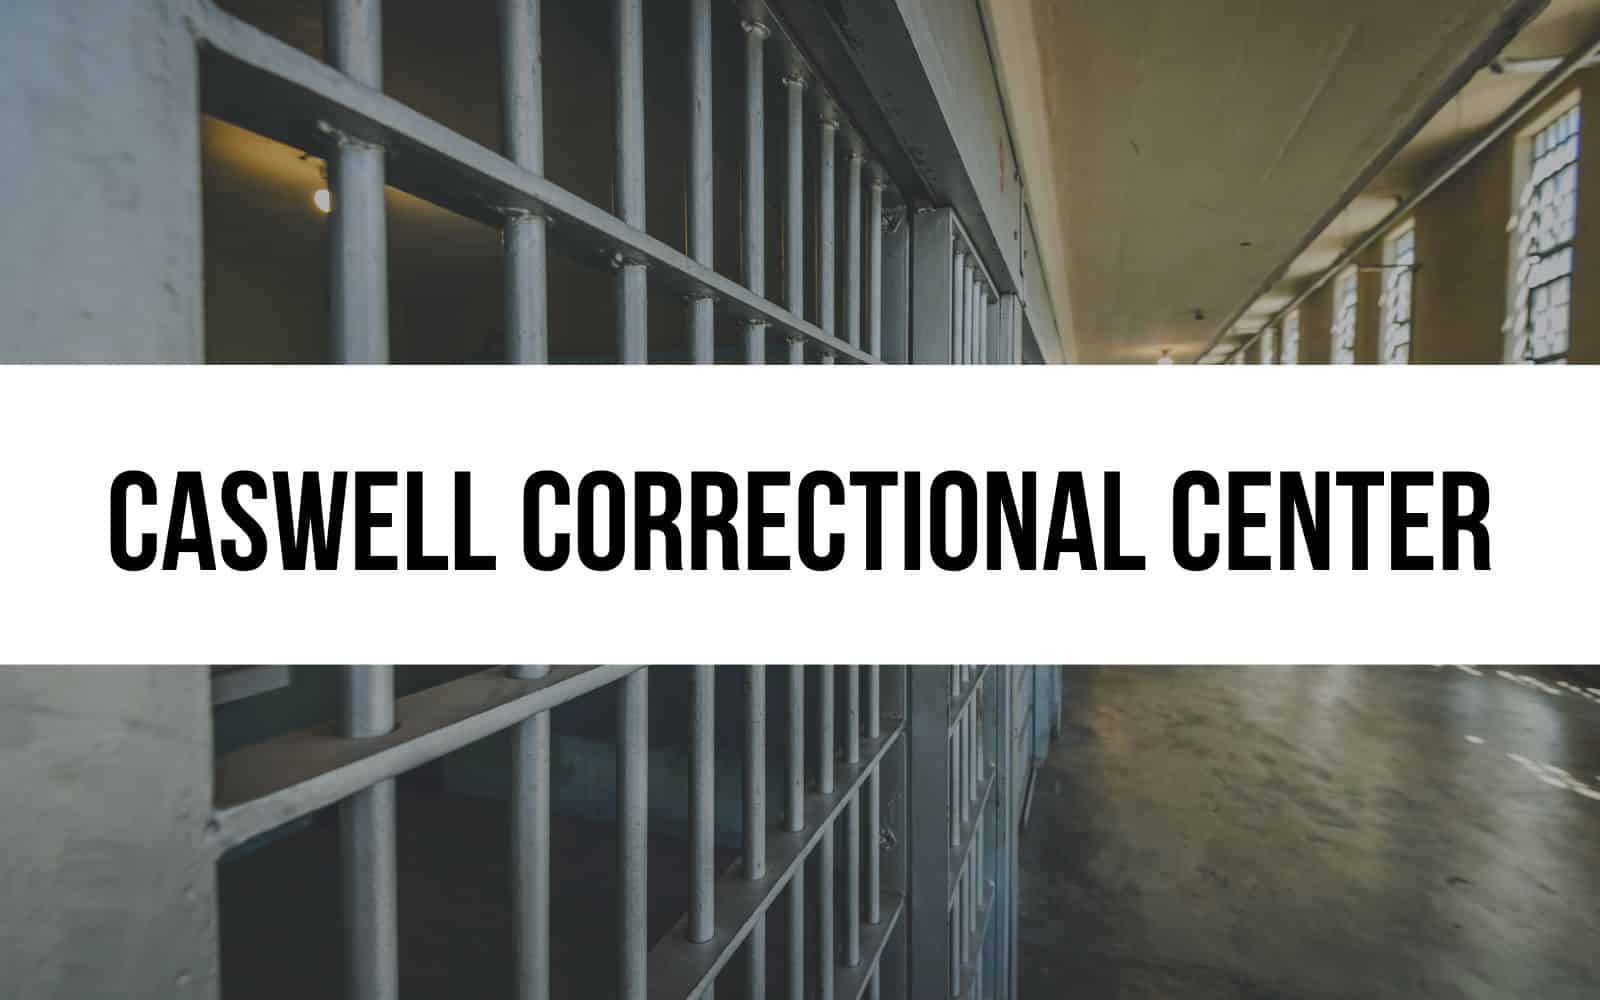 Caswell Correctional Center